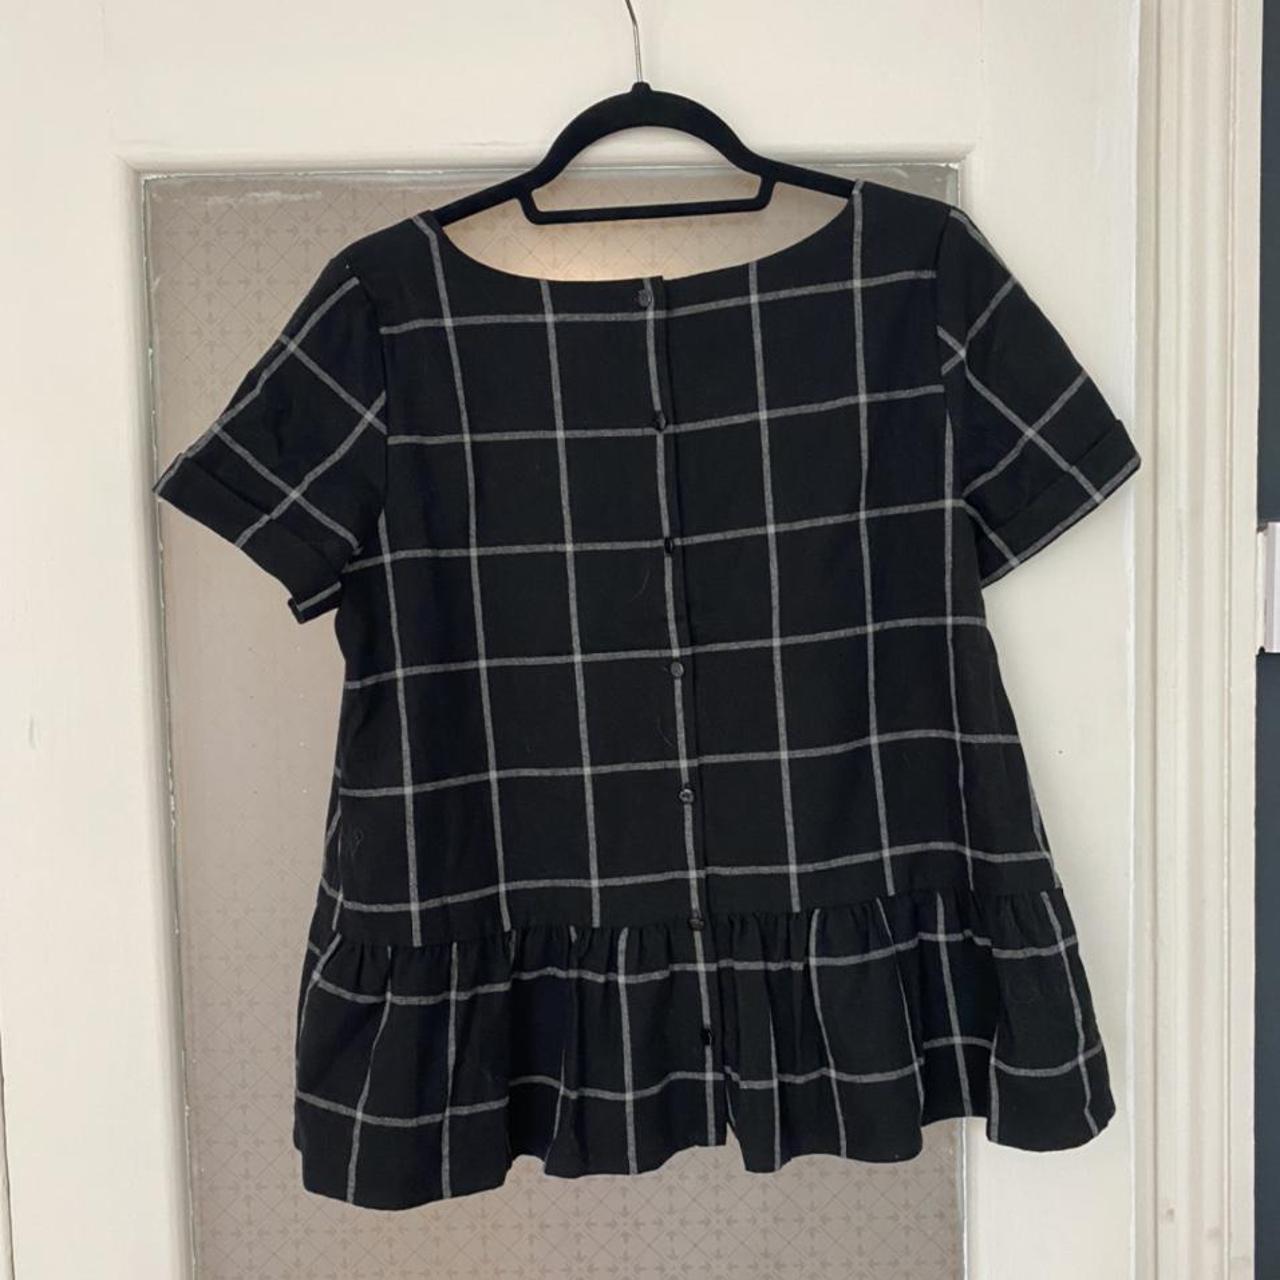 Product Image 2 - Sezane Chequered Top with A